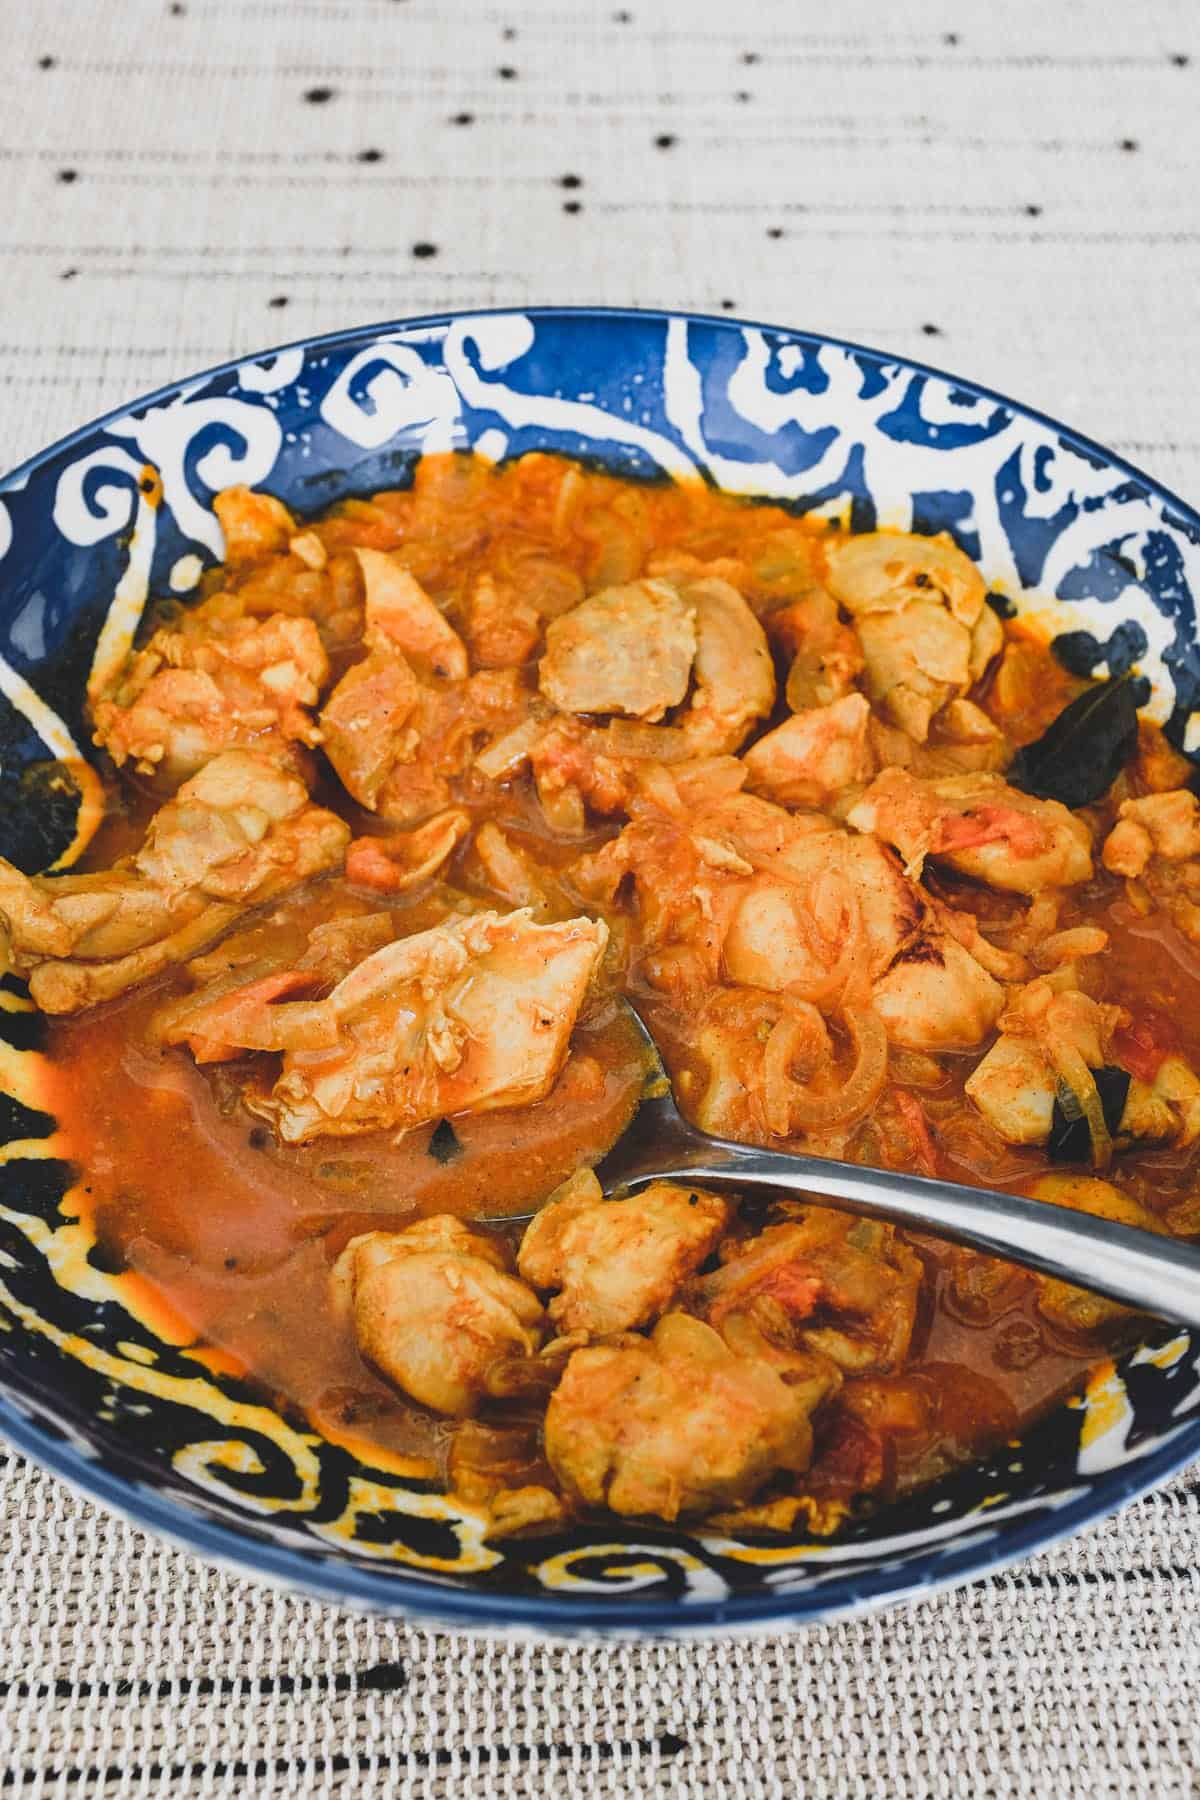 Chicken cooked with vinegar. spices, garlic and tomato.